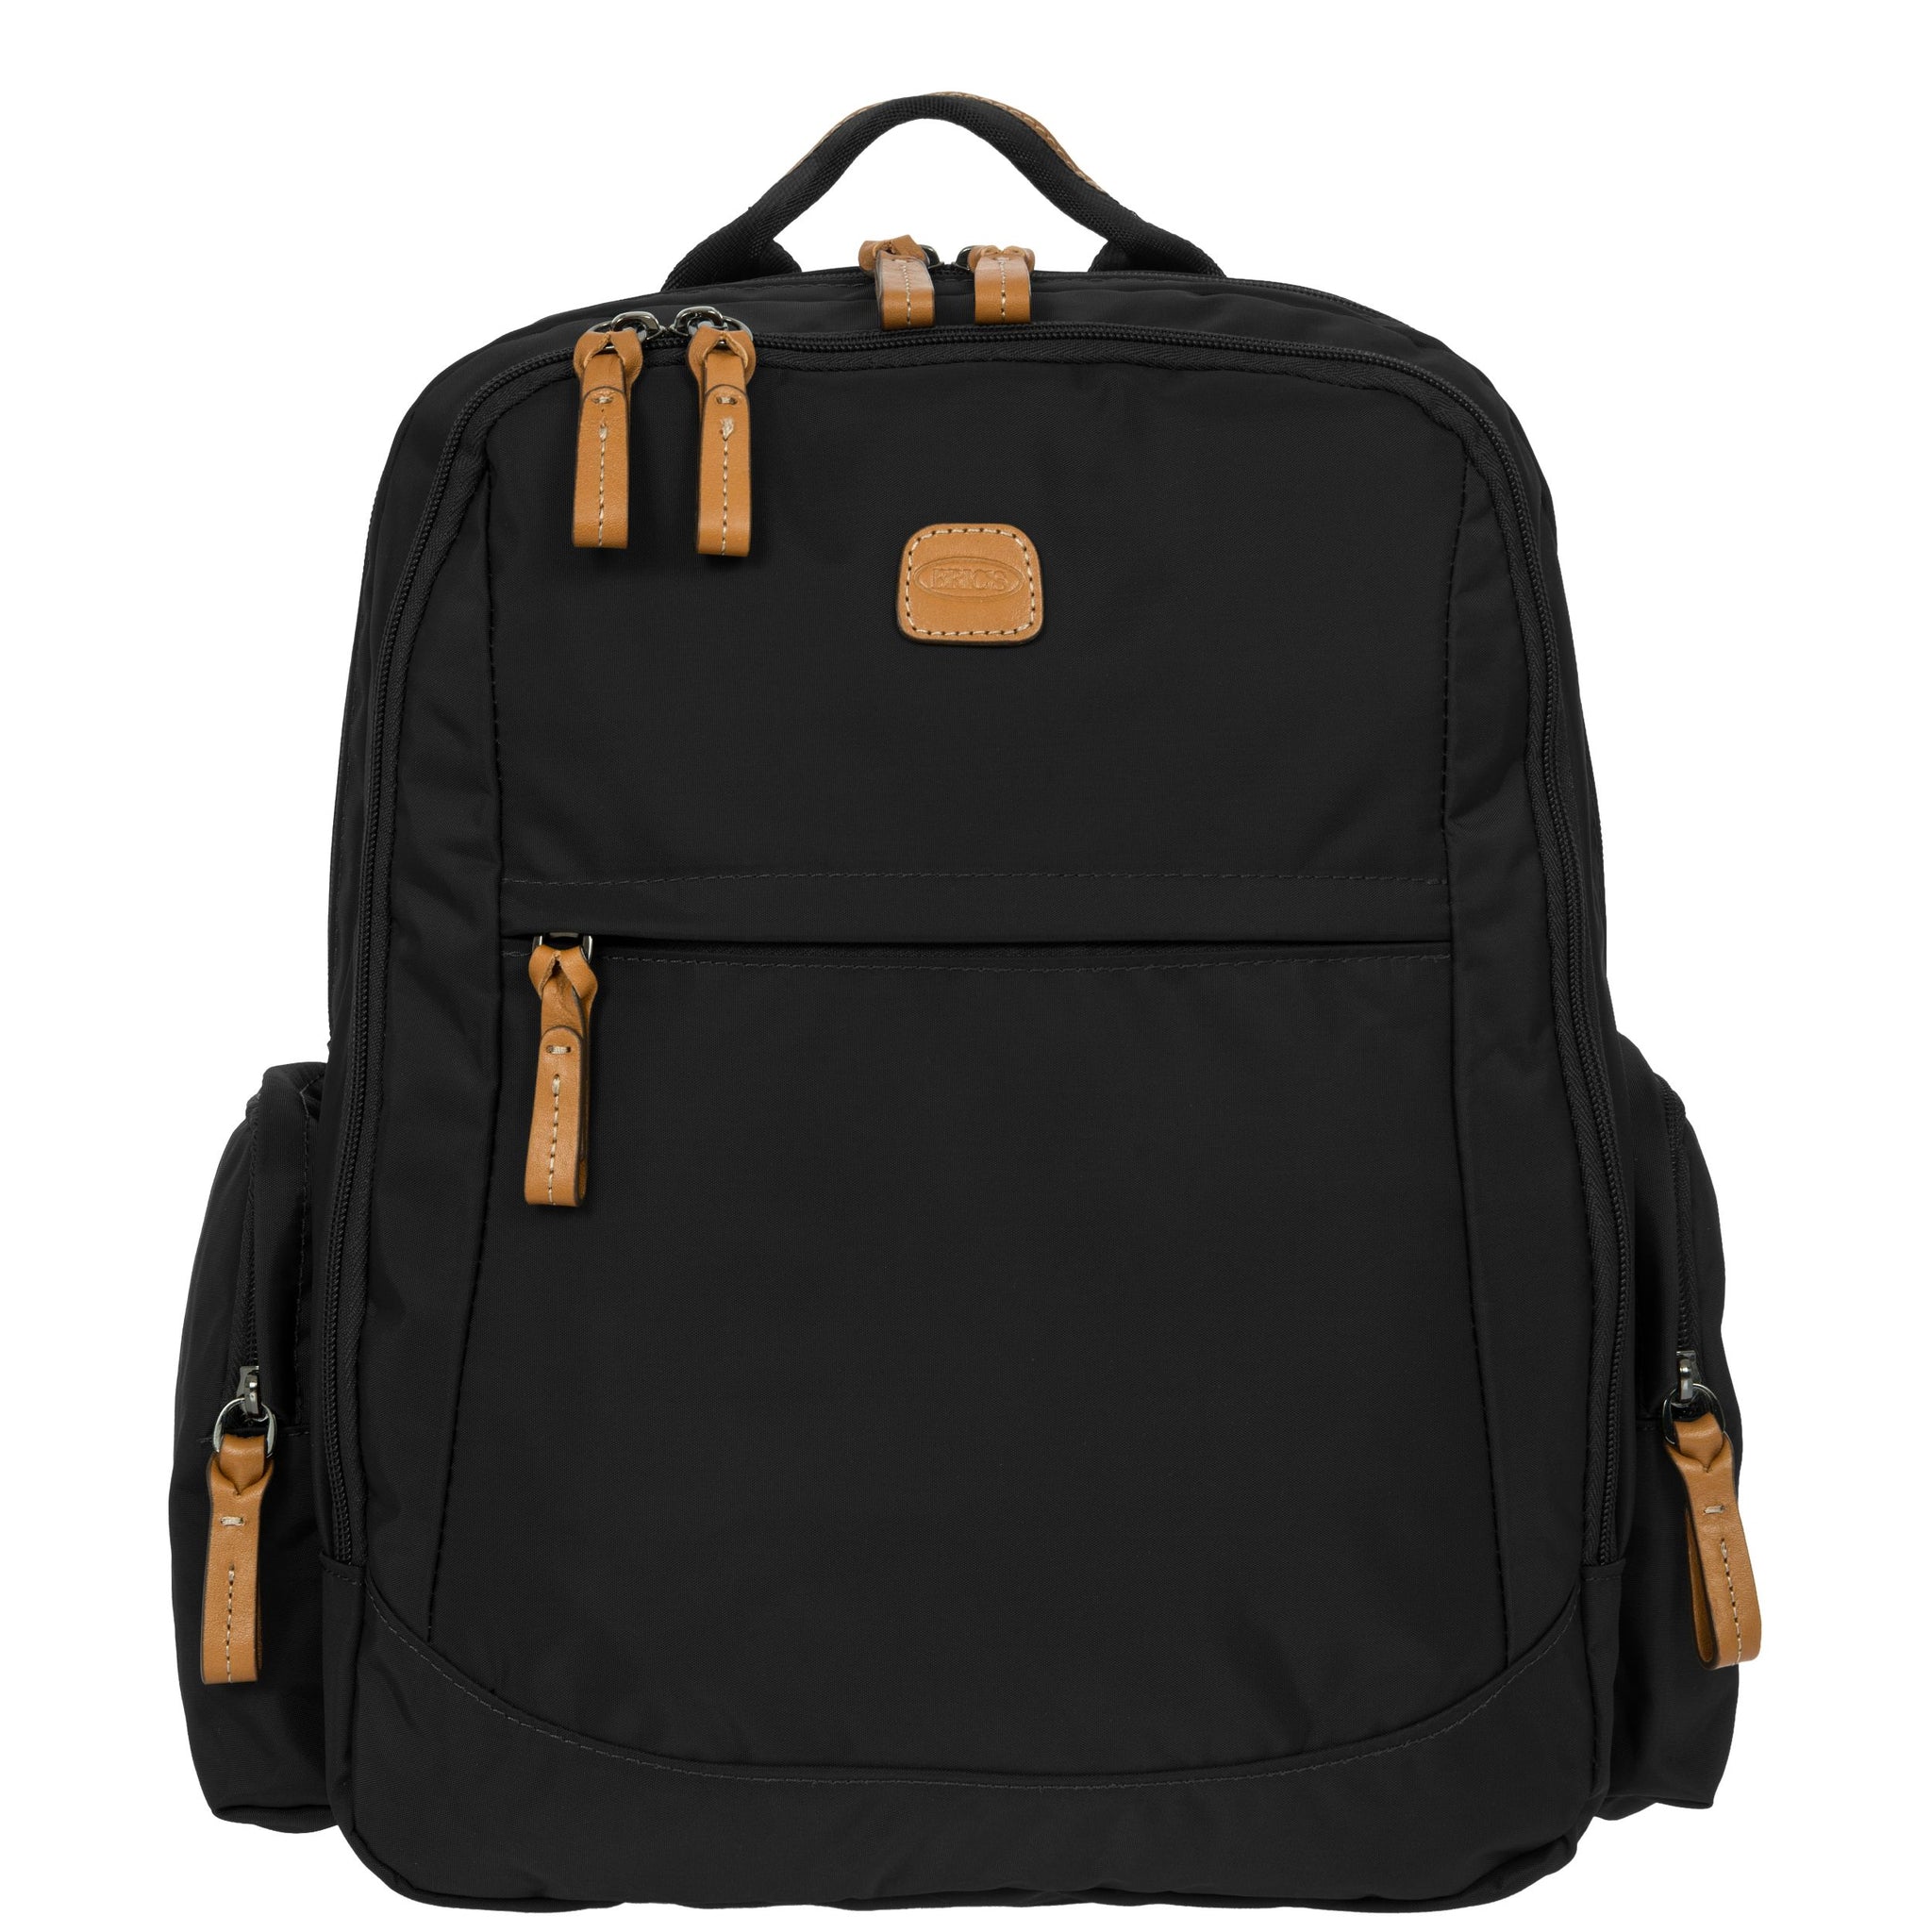 X-Bag / X-Travel Normad Backpack